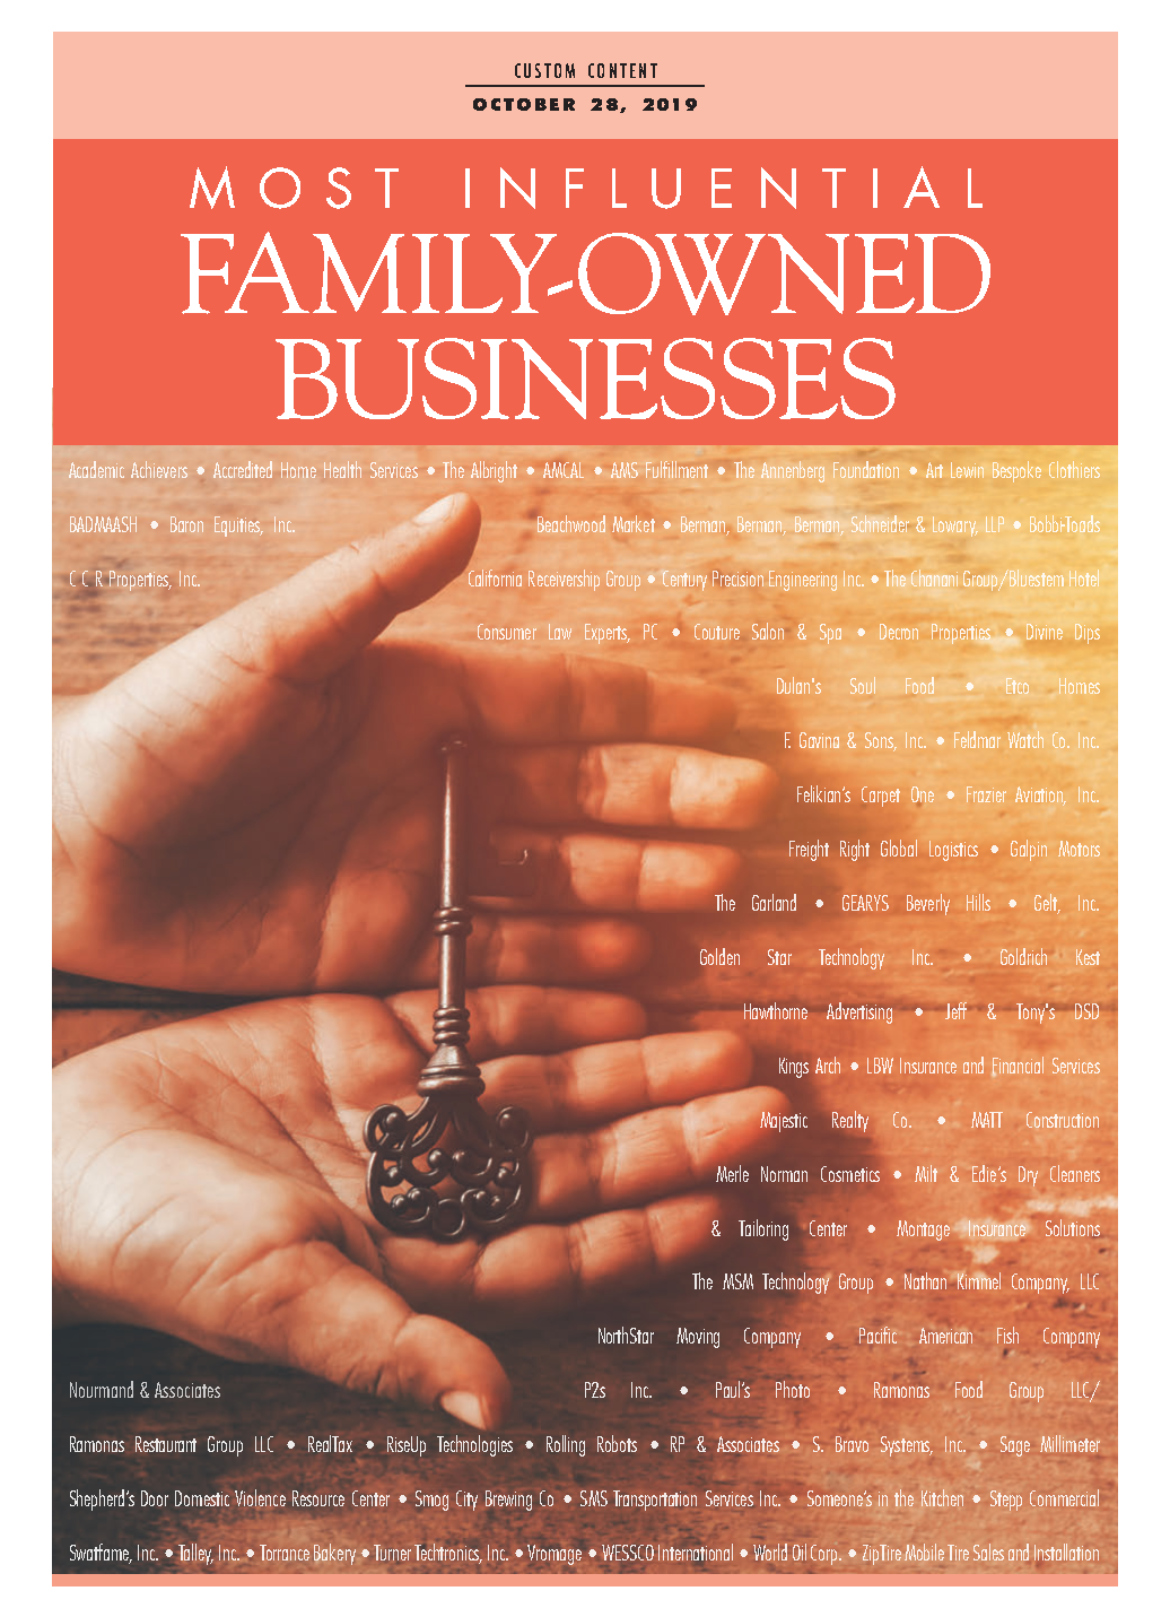 Cover image of the Los Angeles Business Journal 2019